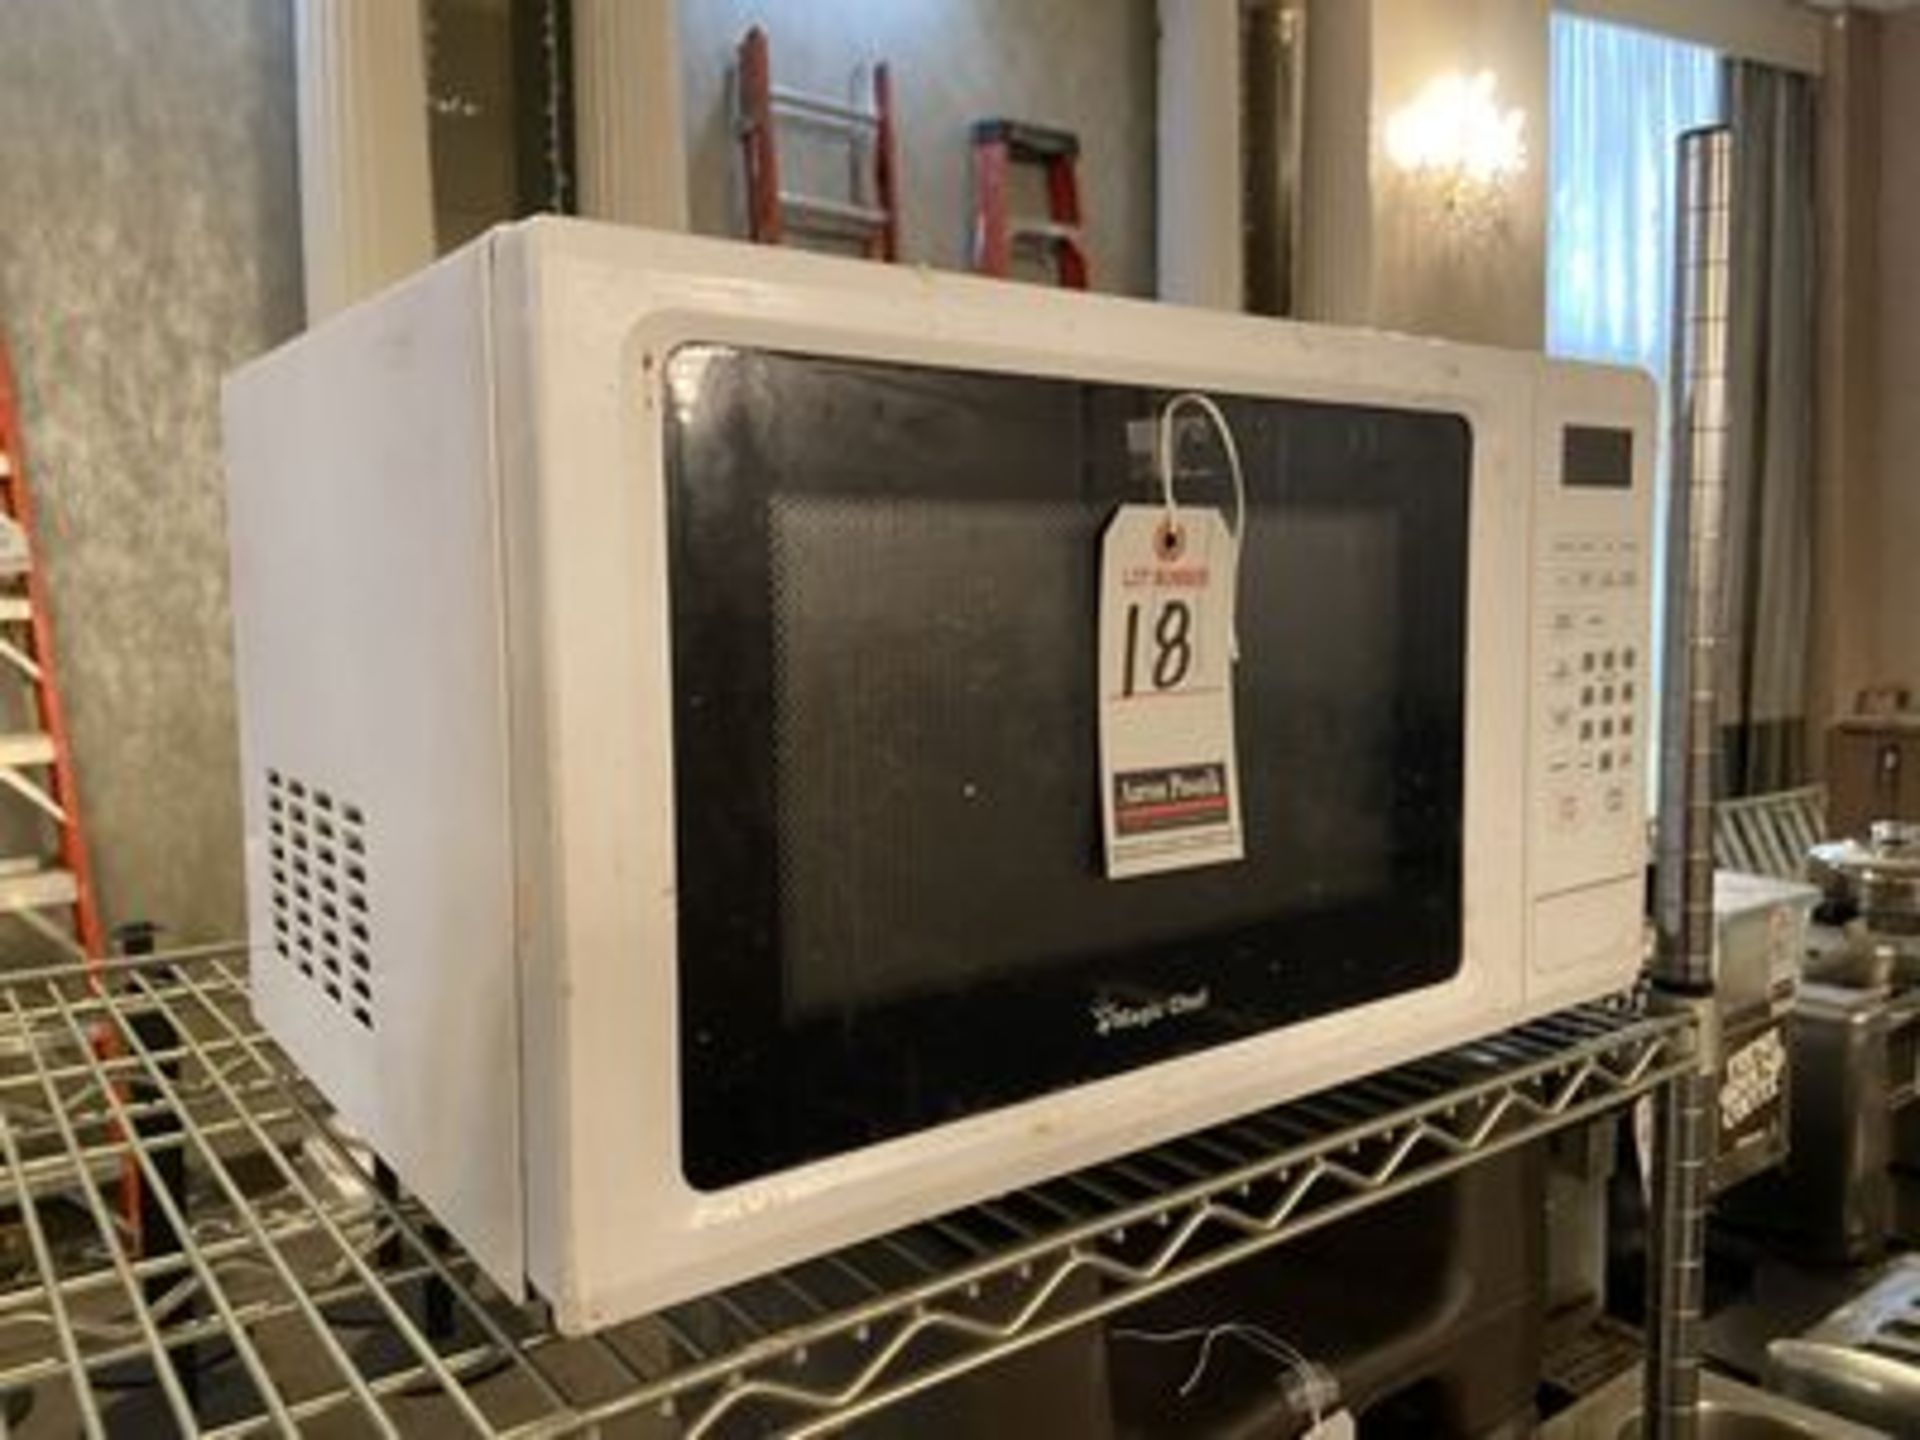 MAGIC CHEF 1D MICROWAVE OVEN